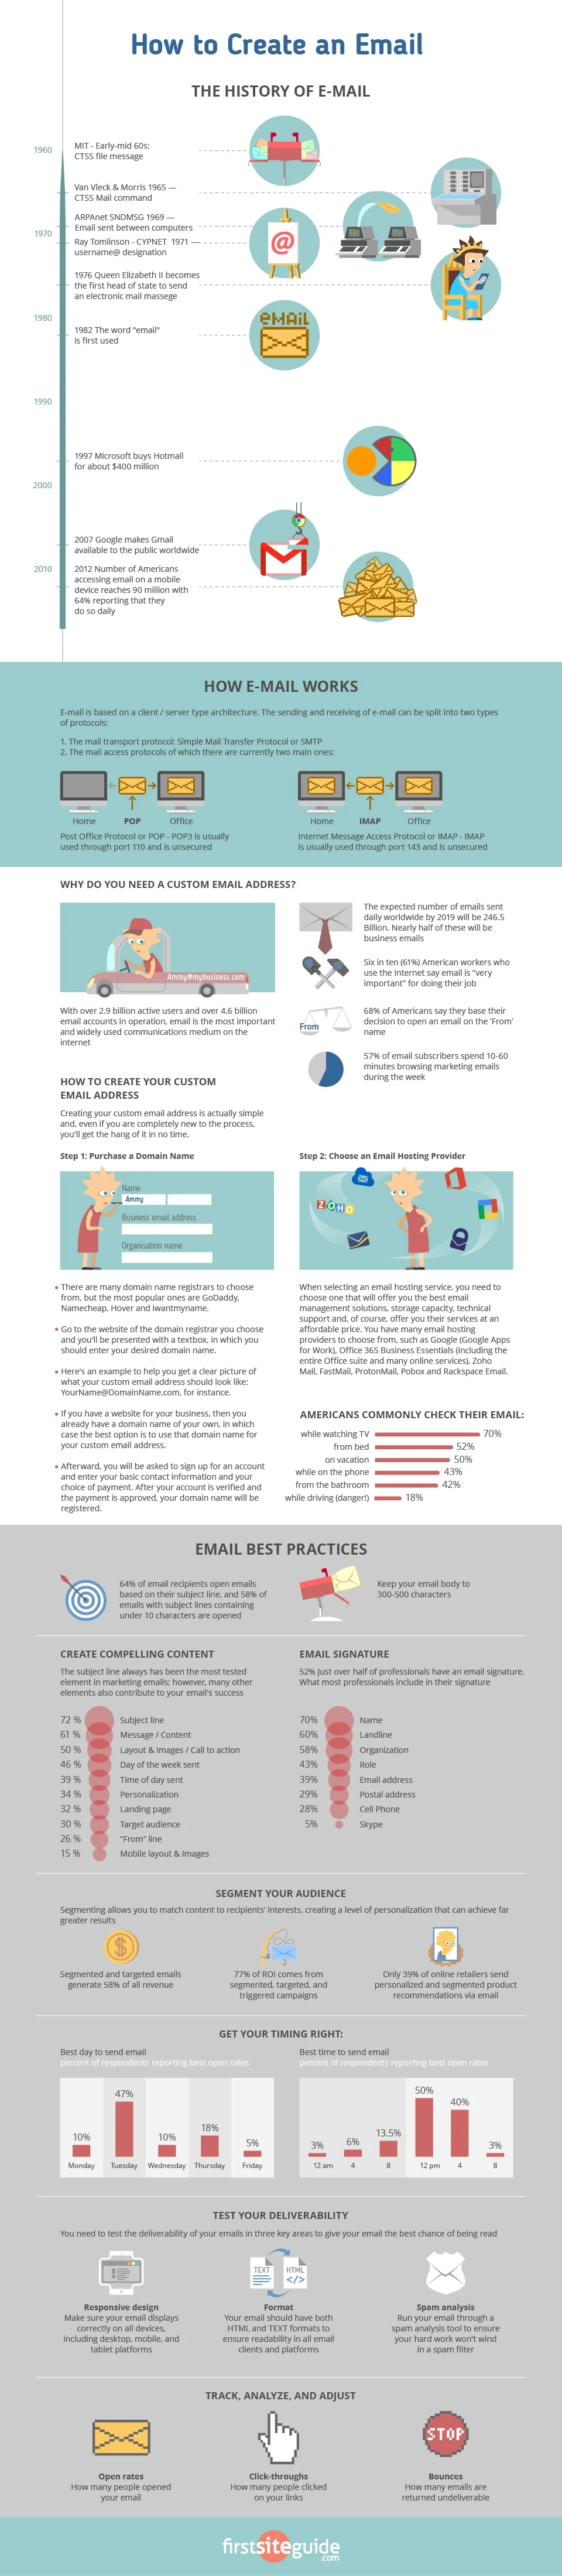 How to Create a Custom Email - #Infographic